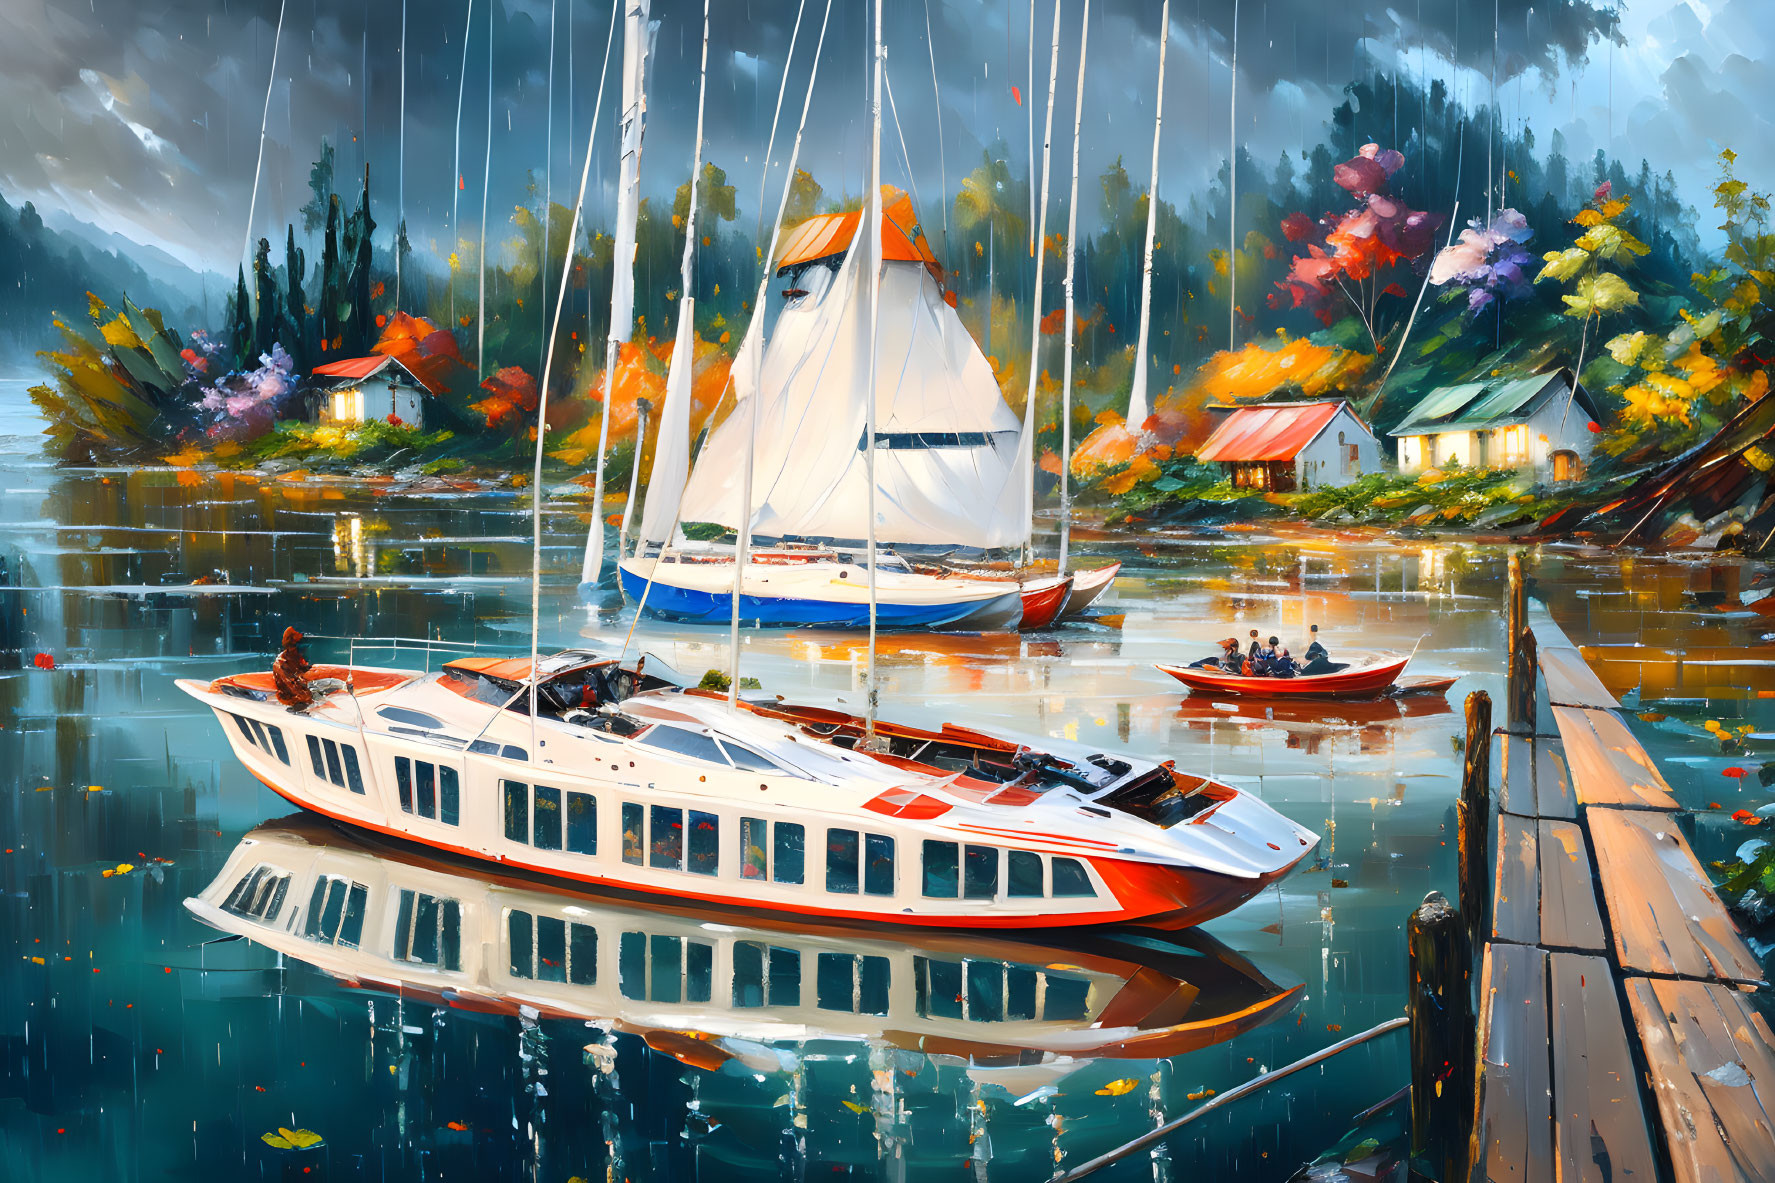 Colorful oil painting of boats on peaceful water with foliage and houses in serene setting